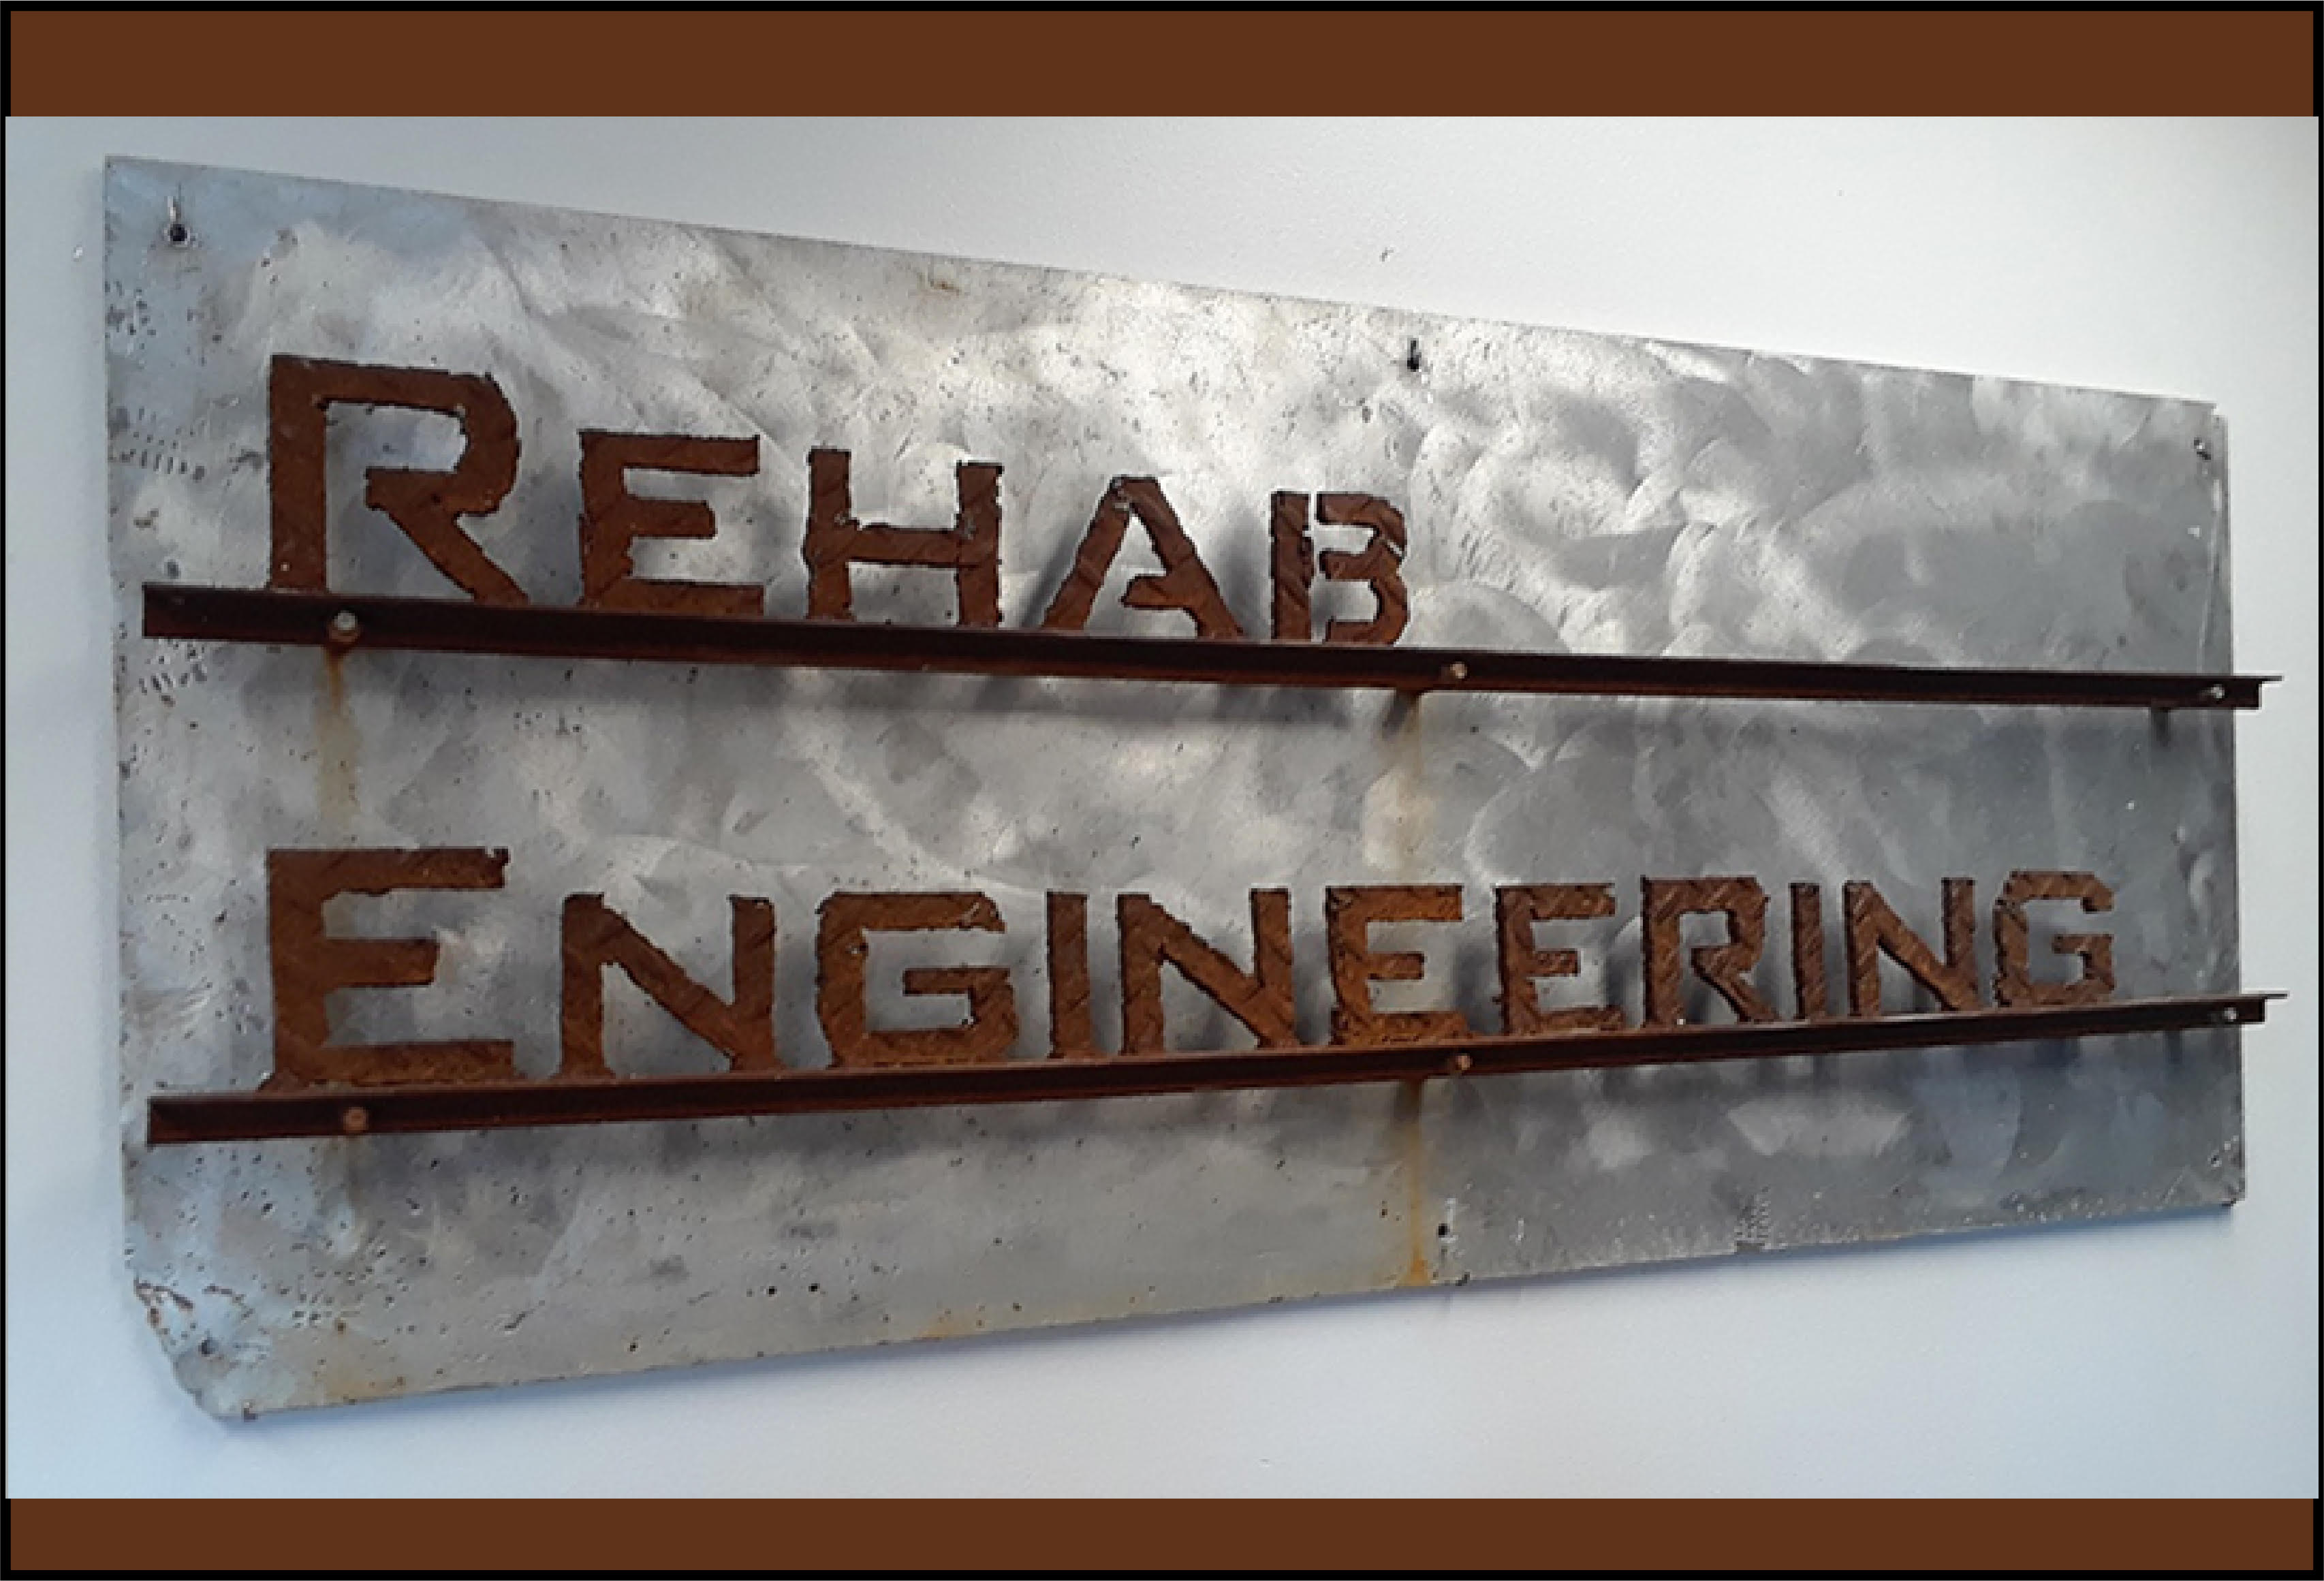 Photo of fabrication shop sign